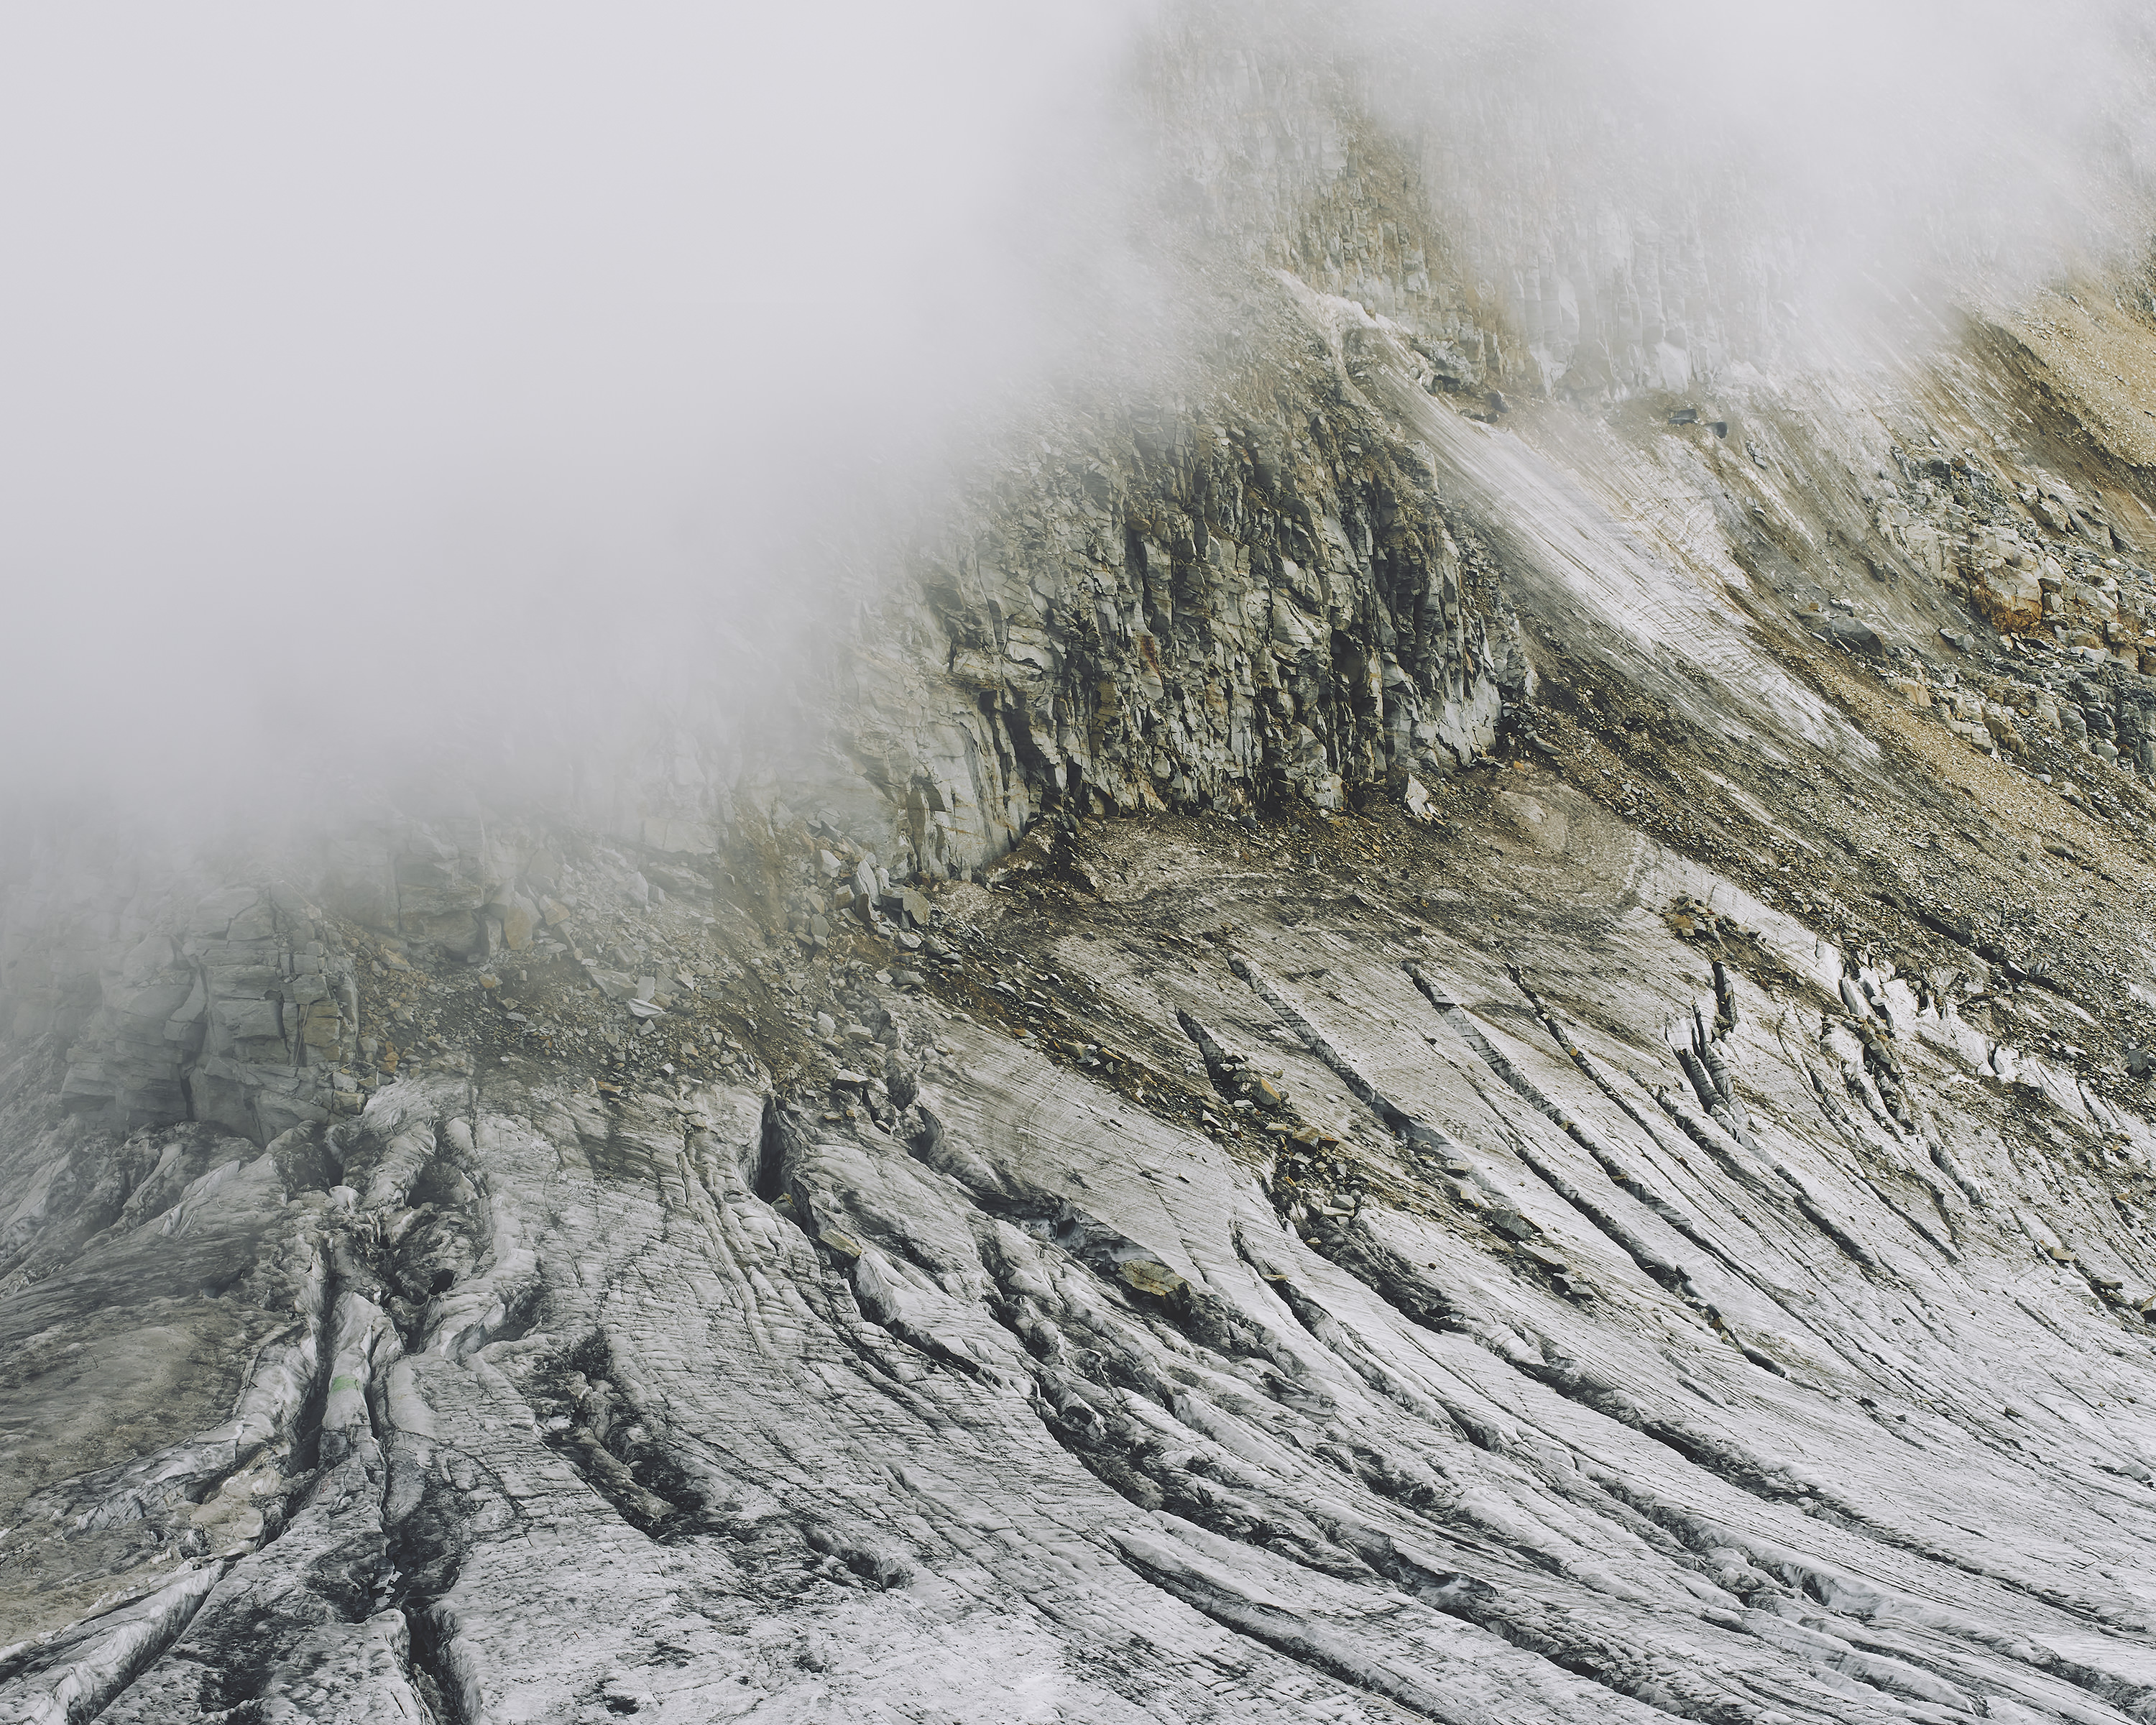 A breathtaking detailed view of a snow-capped mountain surrounded by a mysterious fog